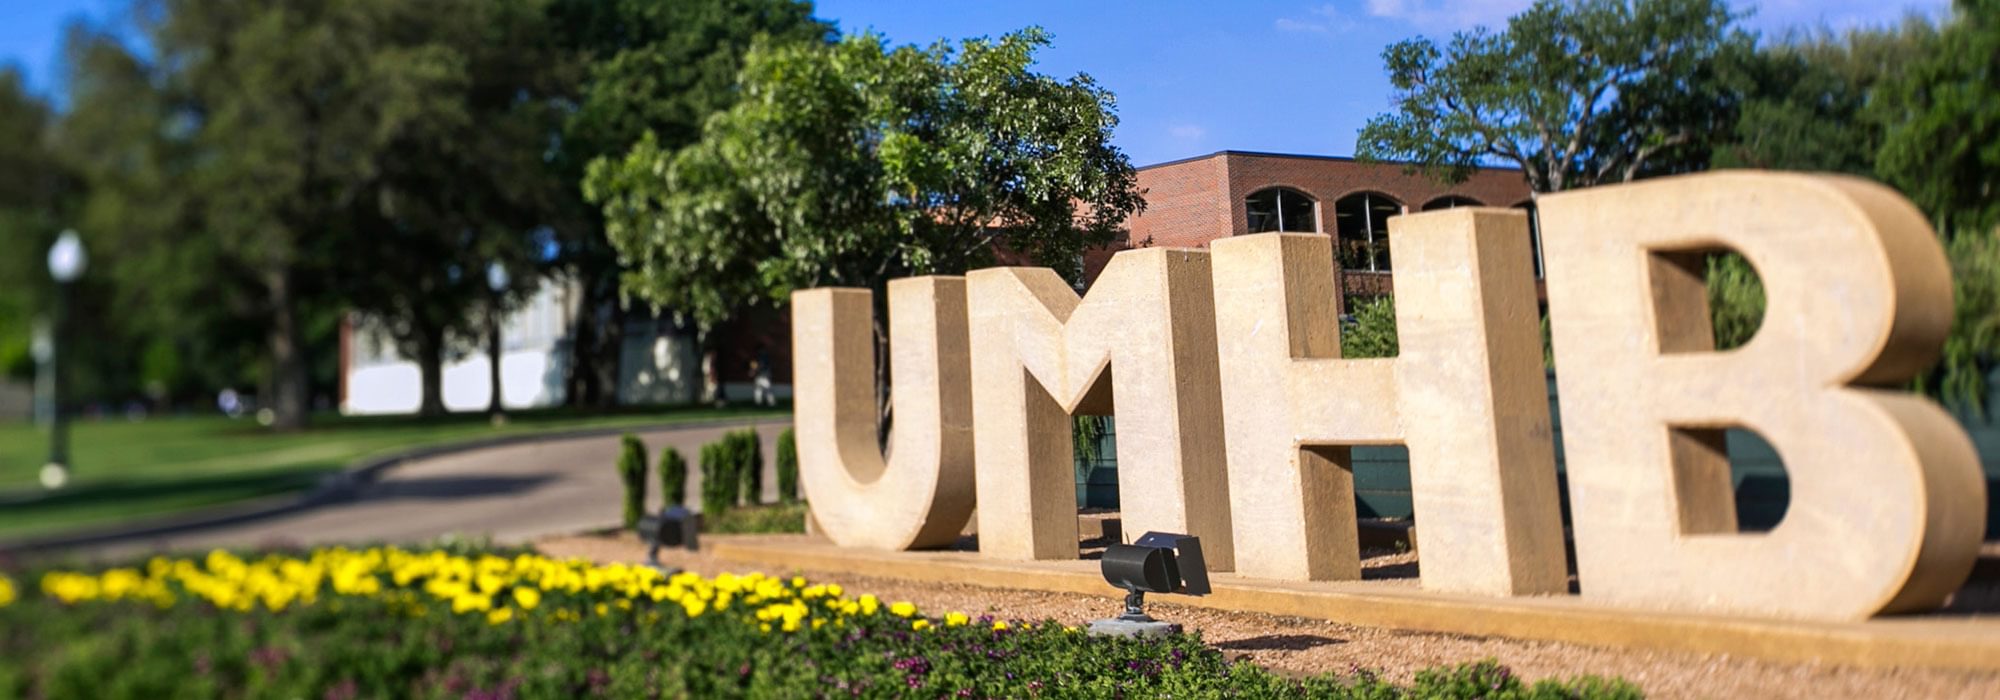 UMHB Celebrates Black History Month With Special Events on Campus